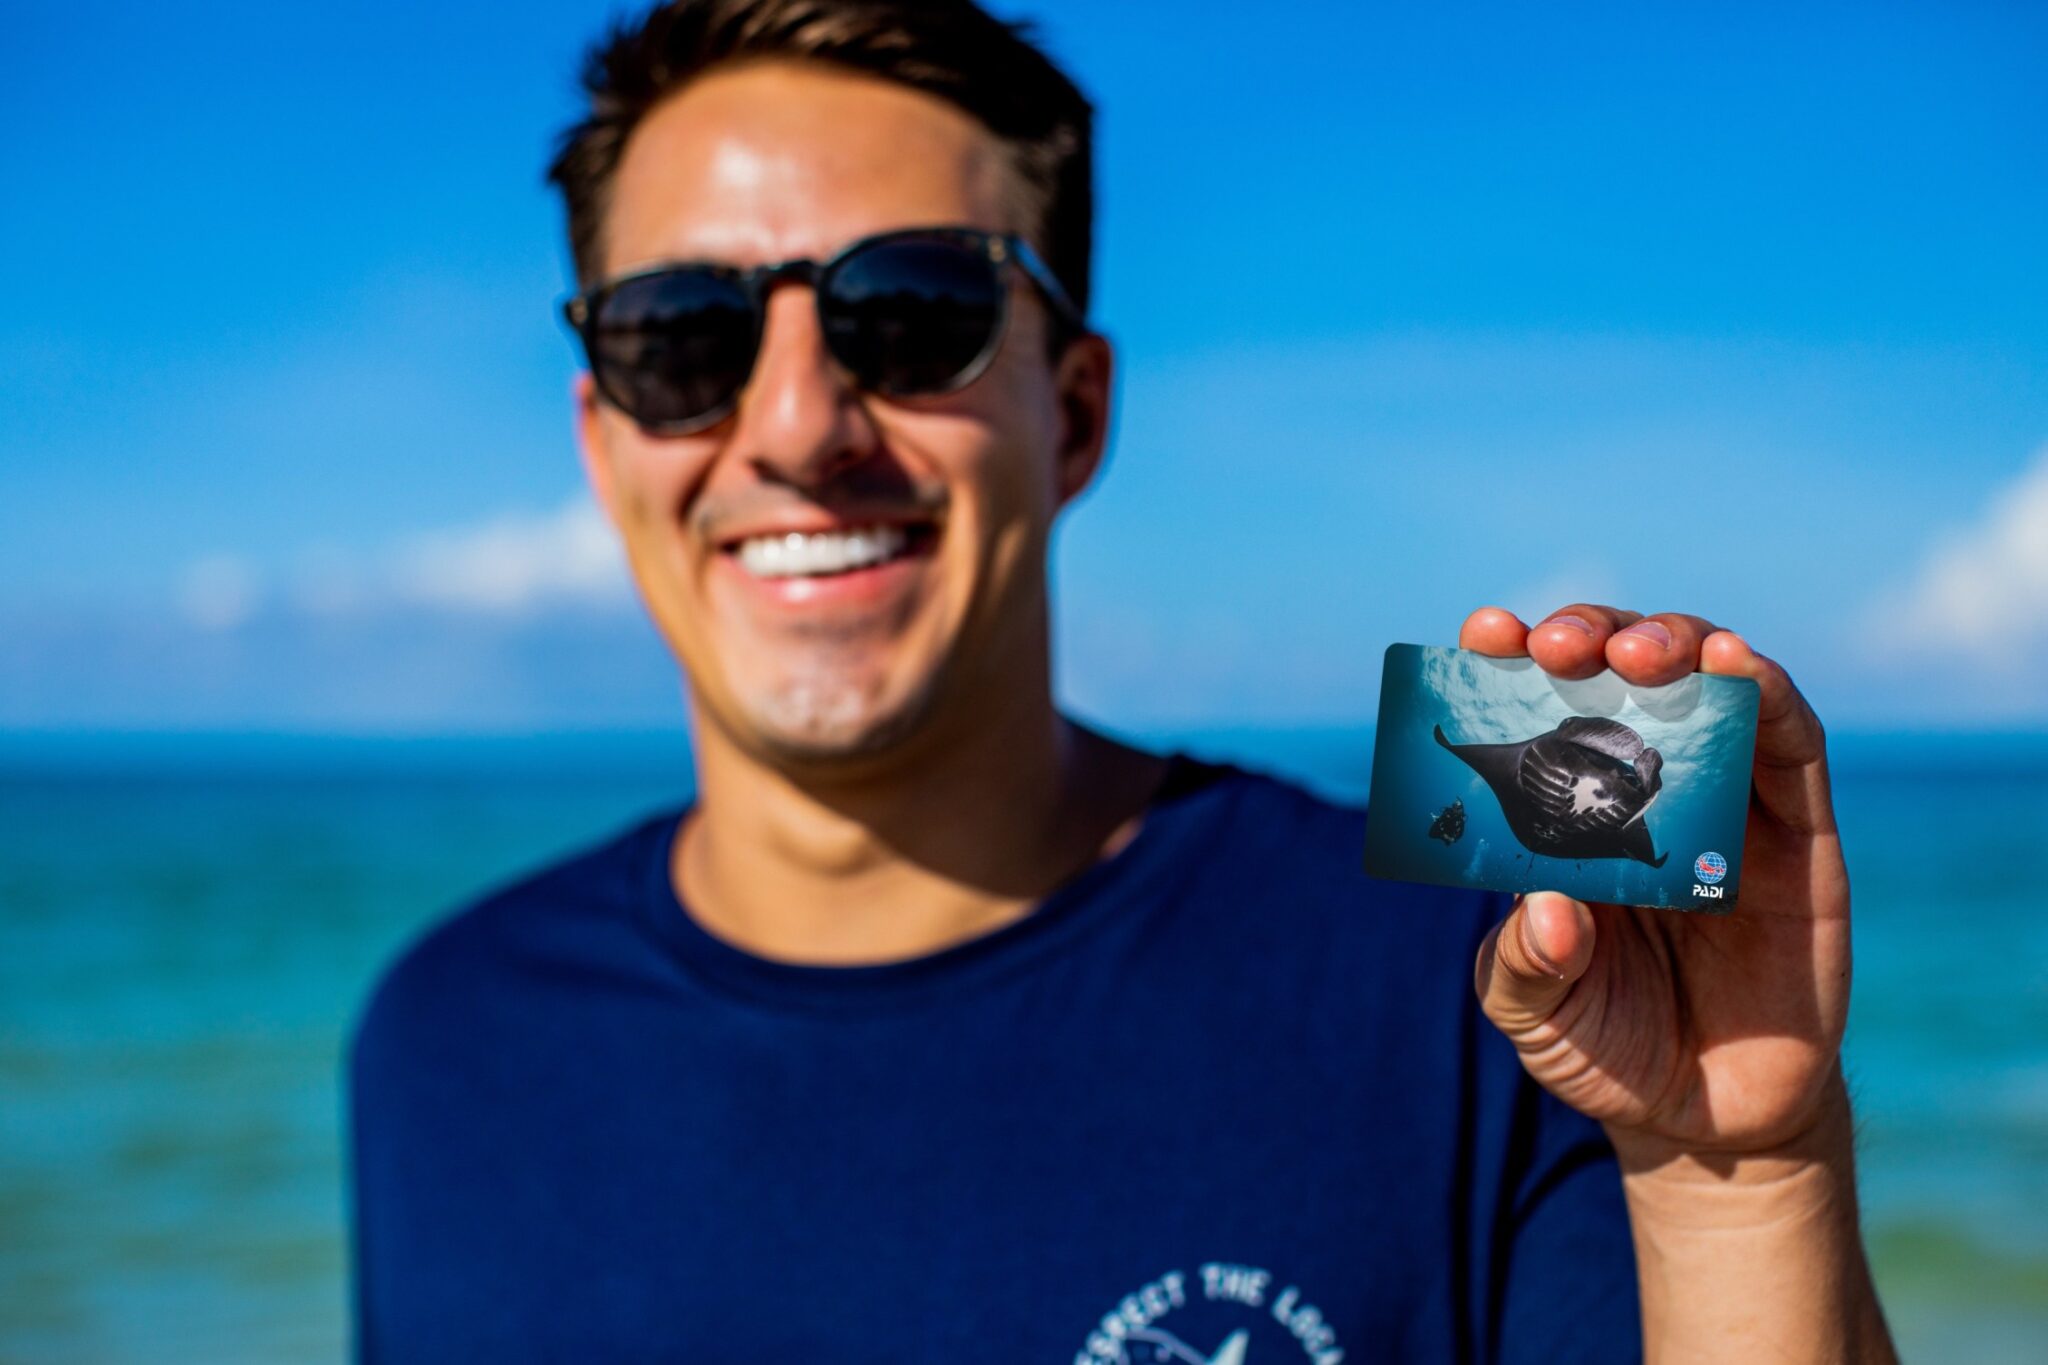 A man on the beach smiles for the camera and holds up a padi certification card showing a manta ray